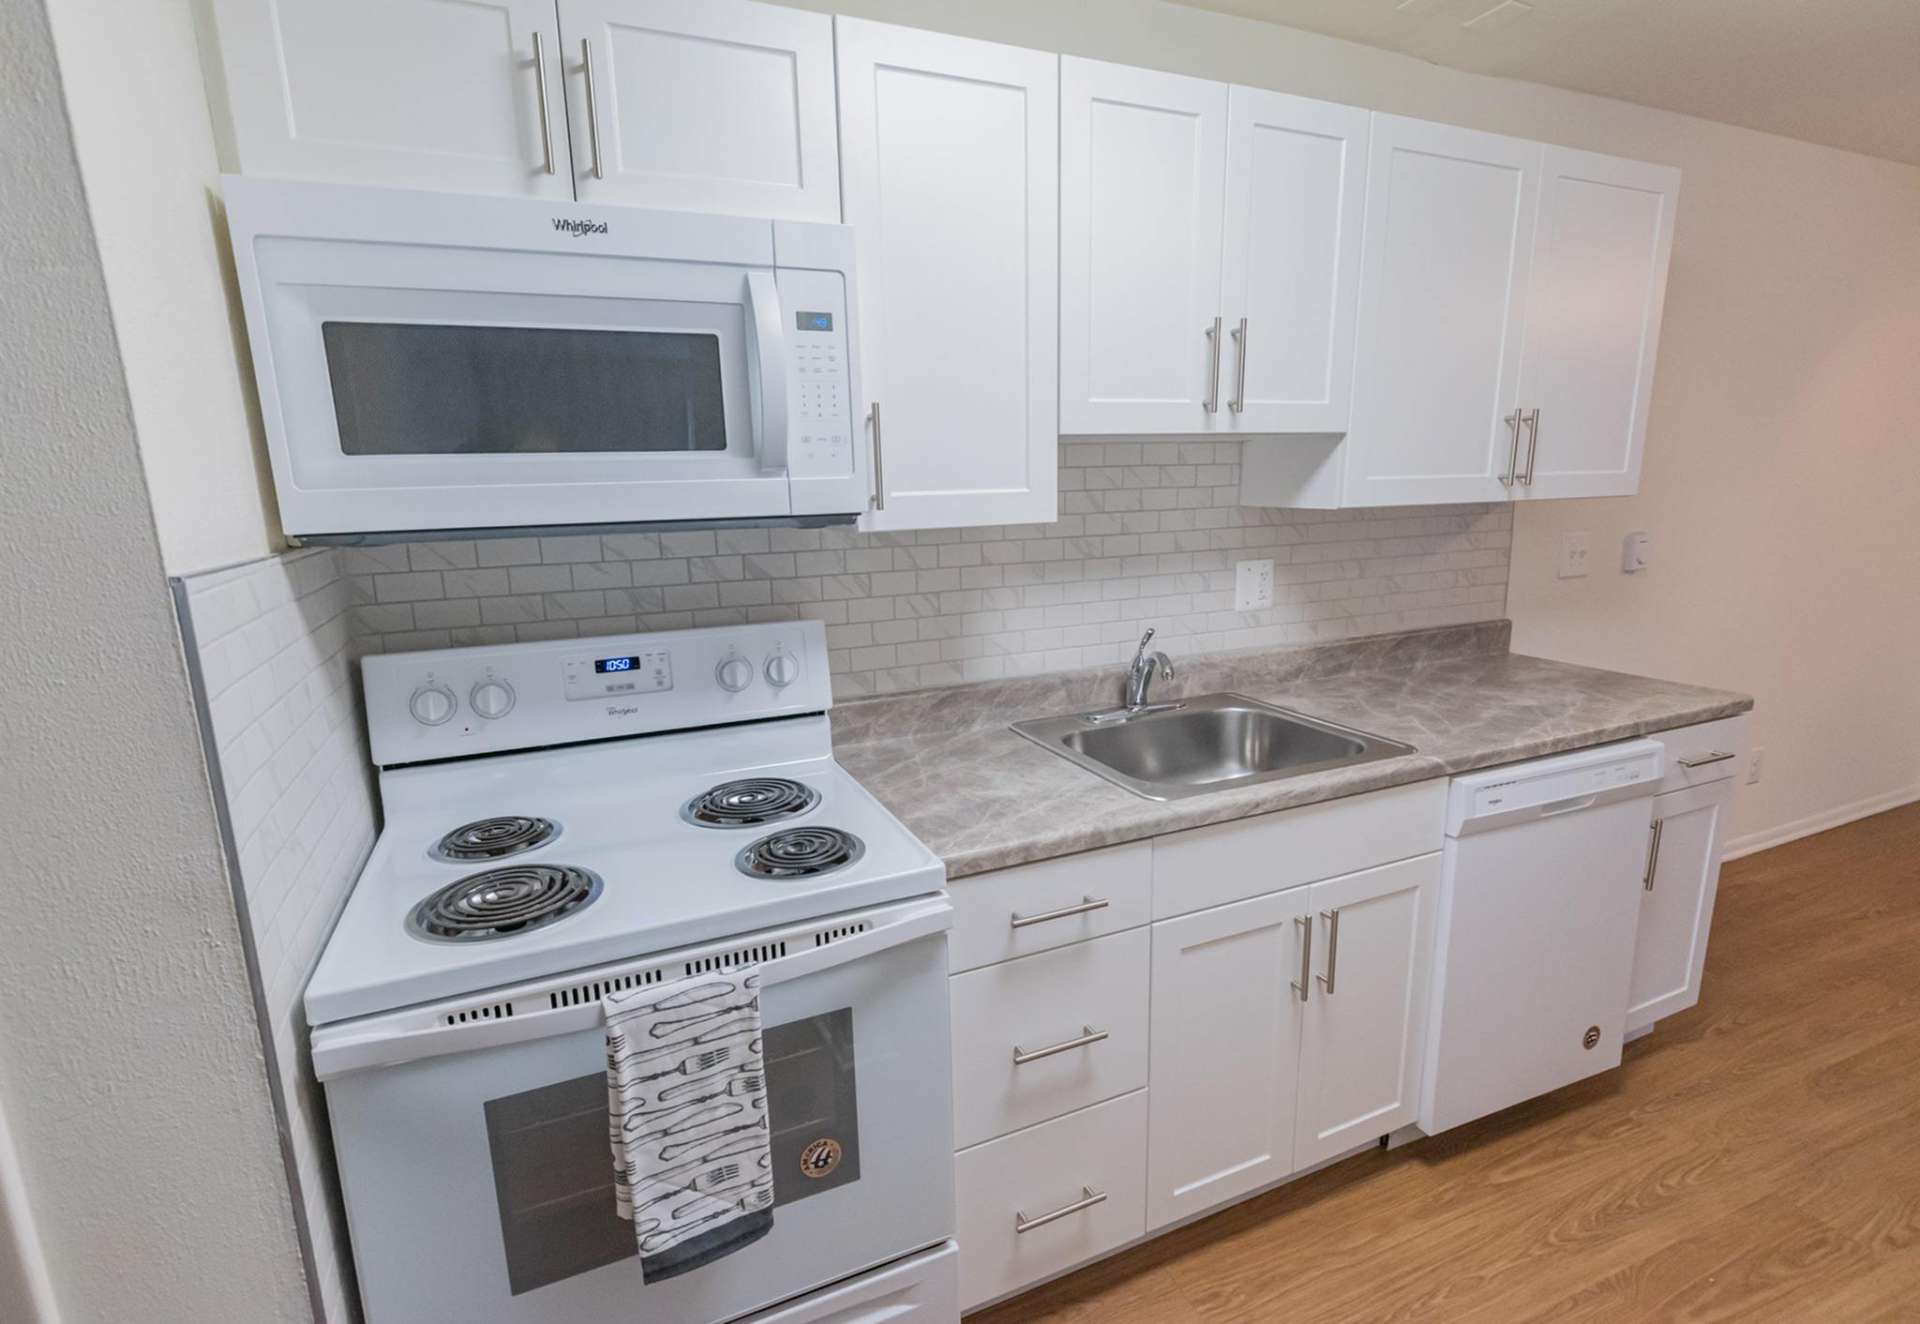 Kitchen area with a dishwasher, stovetop oven, microwave, and white cabinets in an apartment at Hollow Run.